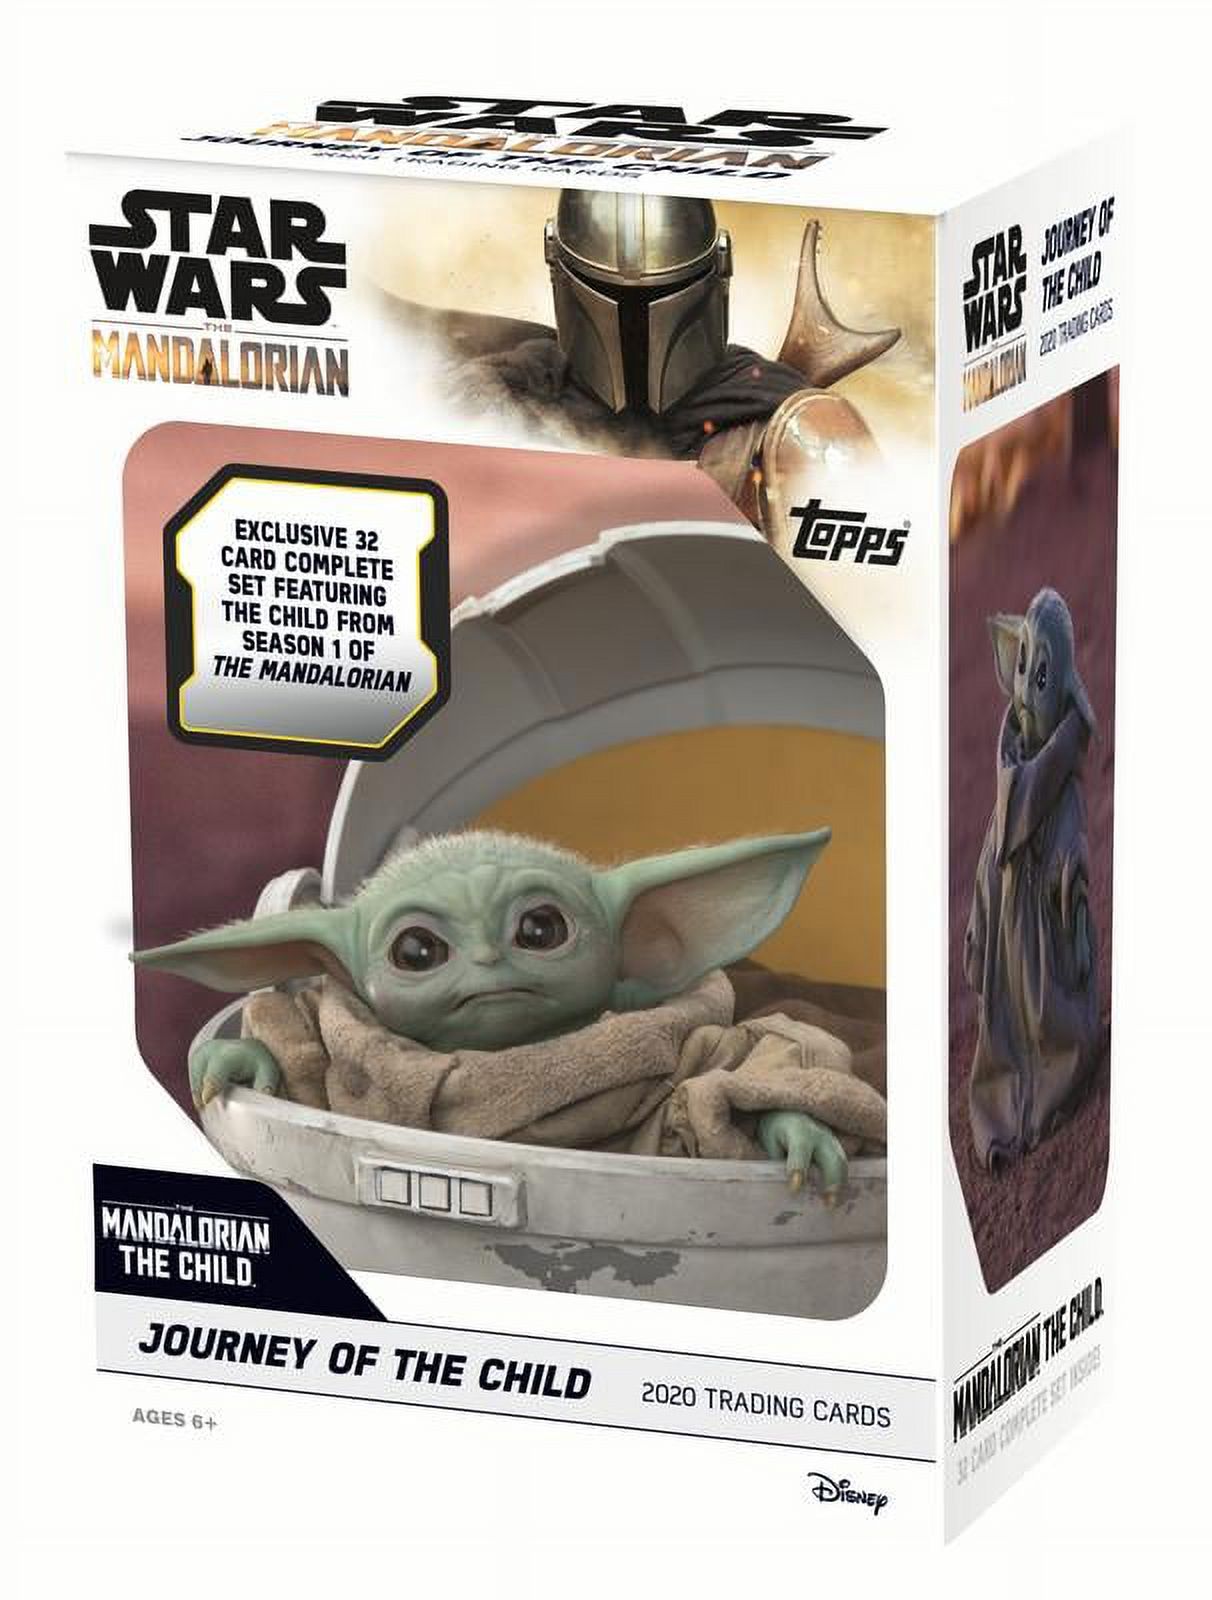 Topps the Mandalorian: Journey of the Child Star Wars Trading Cards Blaster Box- Featuring Baby Yoda - image 1 of 3